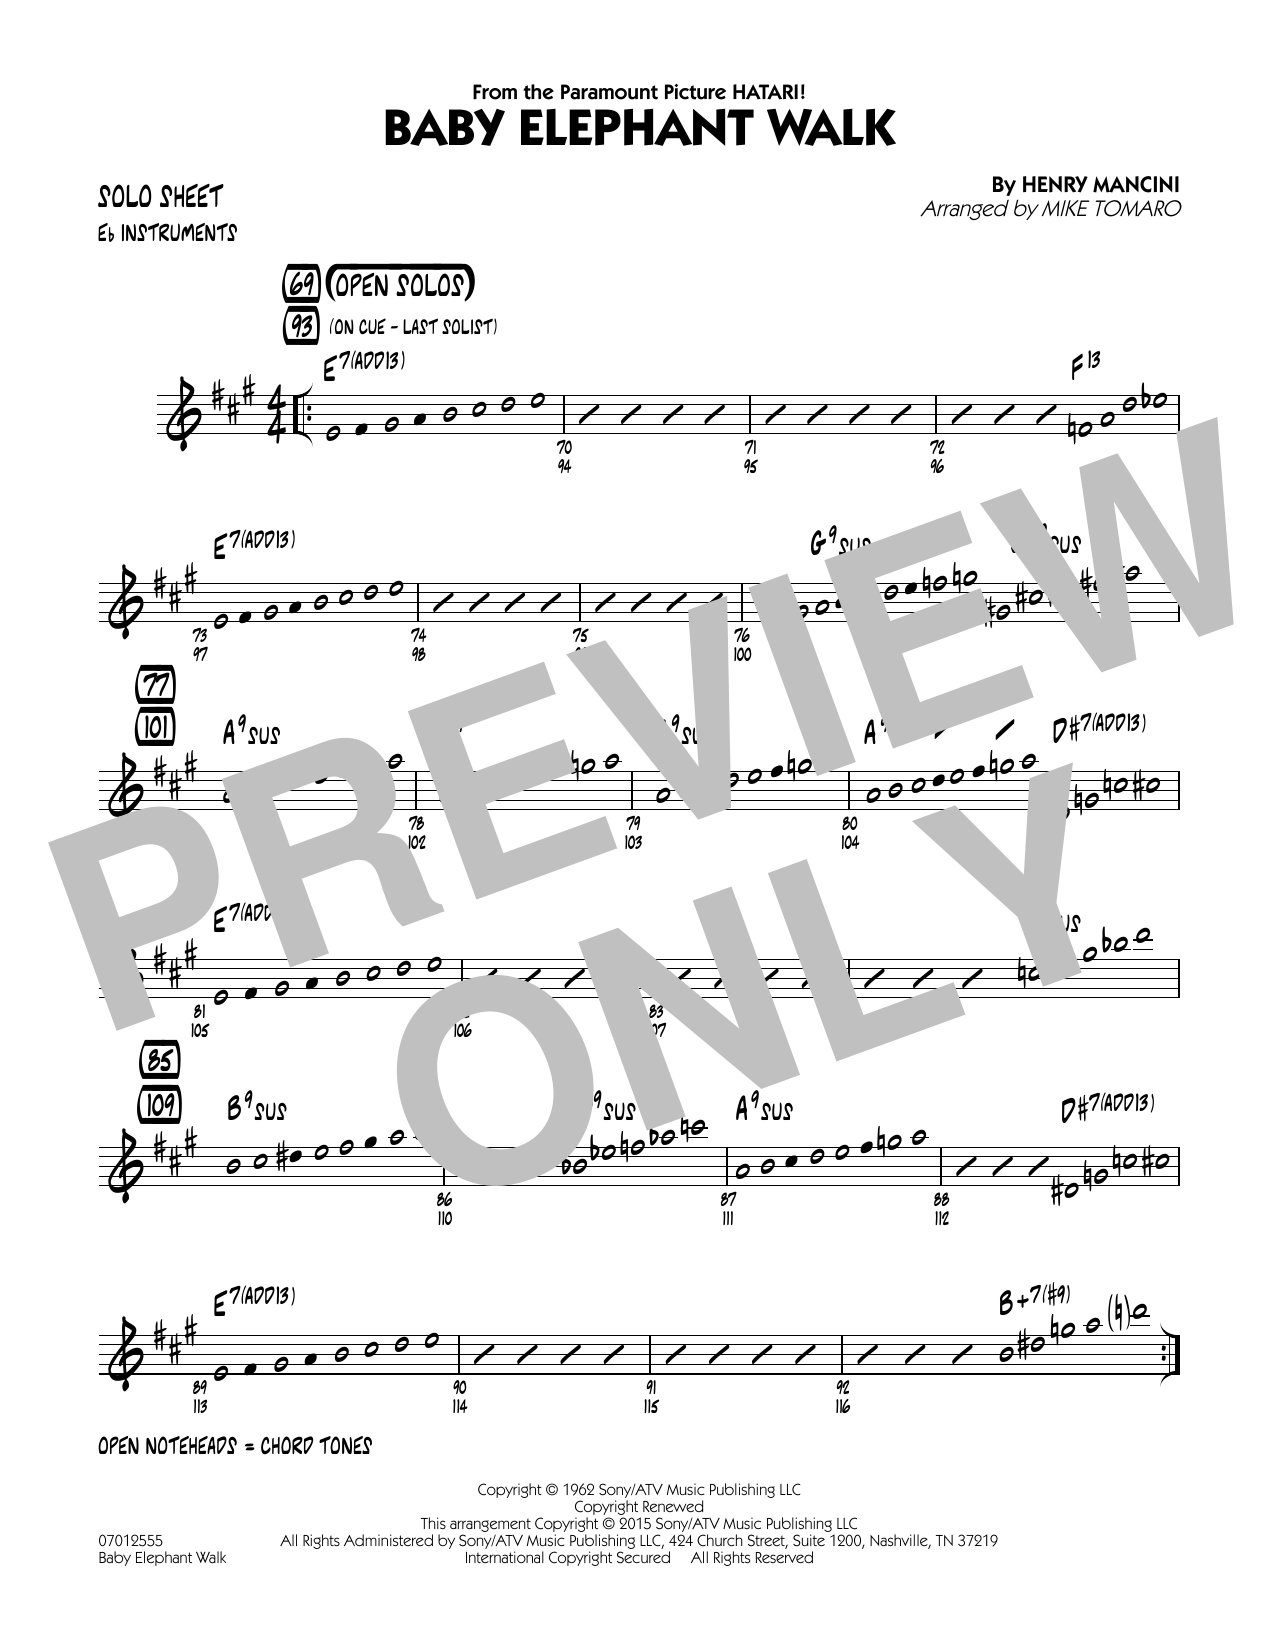 Mike Tomaro Baby Elephant Walk - Eb Solo Sheet sheet music notes and chords. Download Printable PDF.